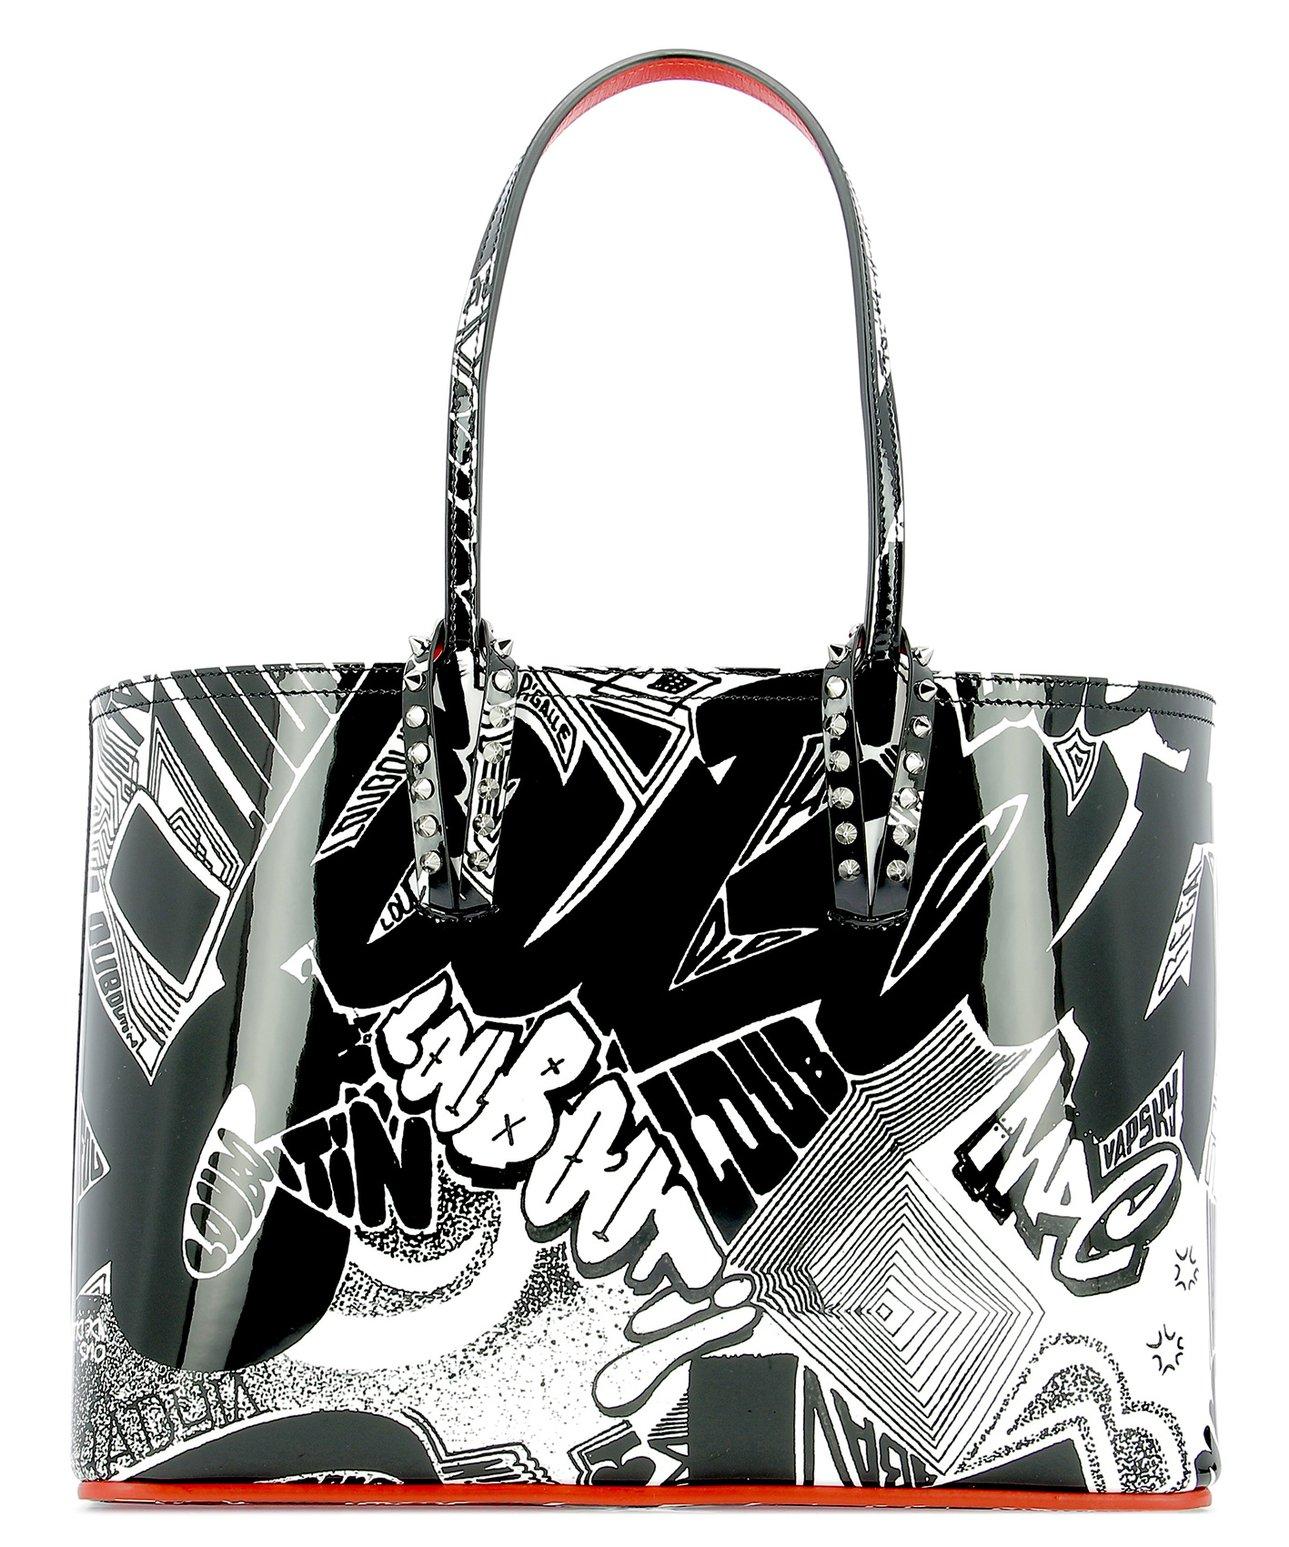 CHRISTIAN LOUBOUTIN: Cabata bag in leather - Black  Christian Louboutin  tote bags 1235008 online at